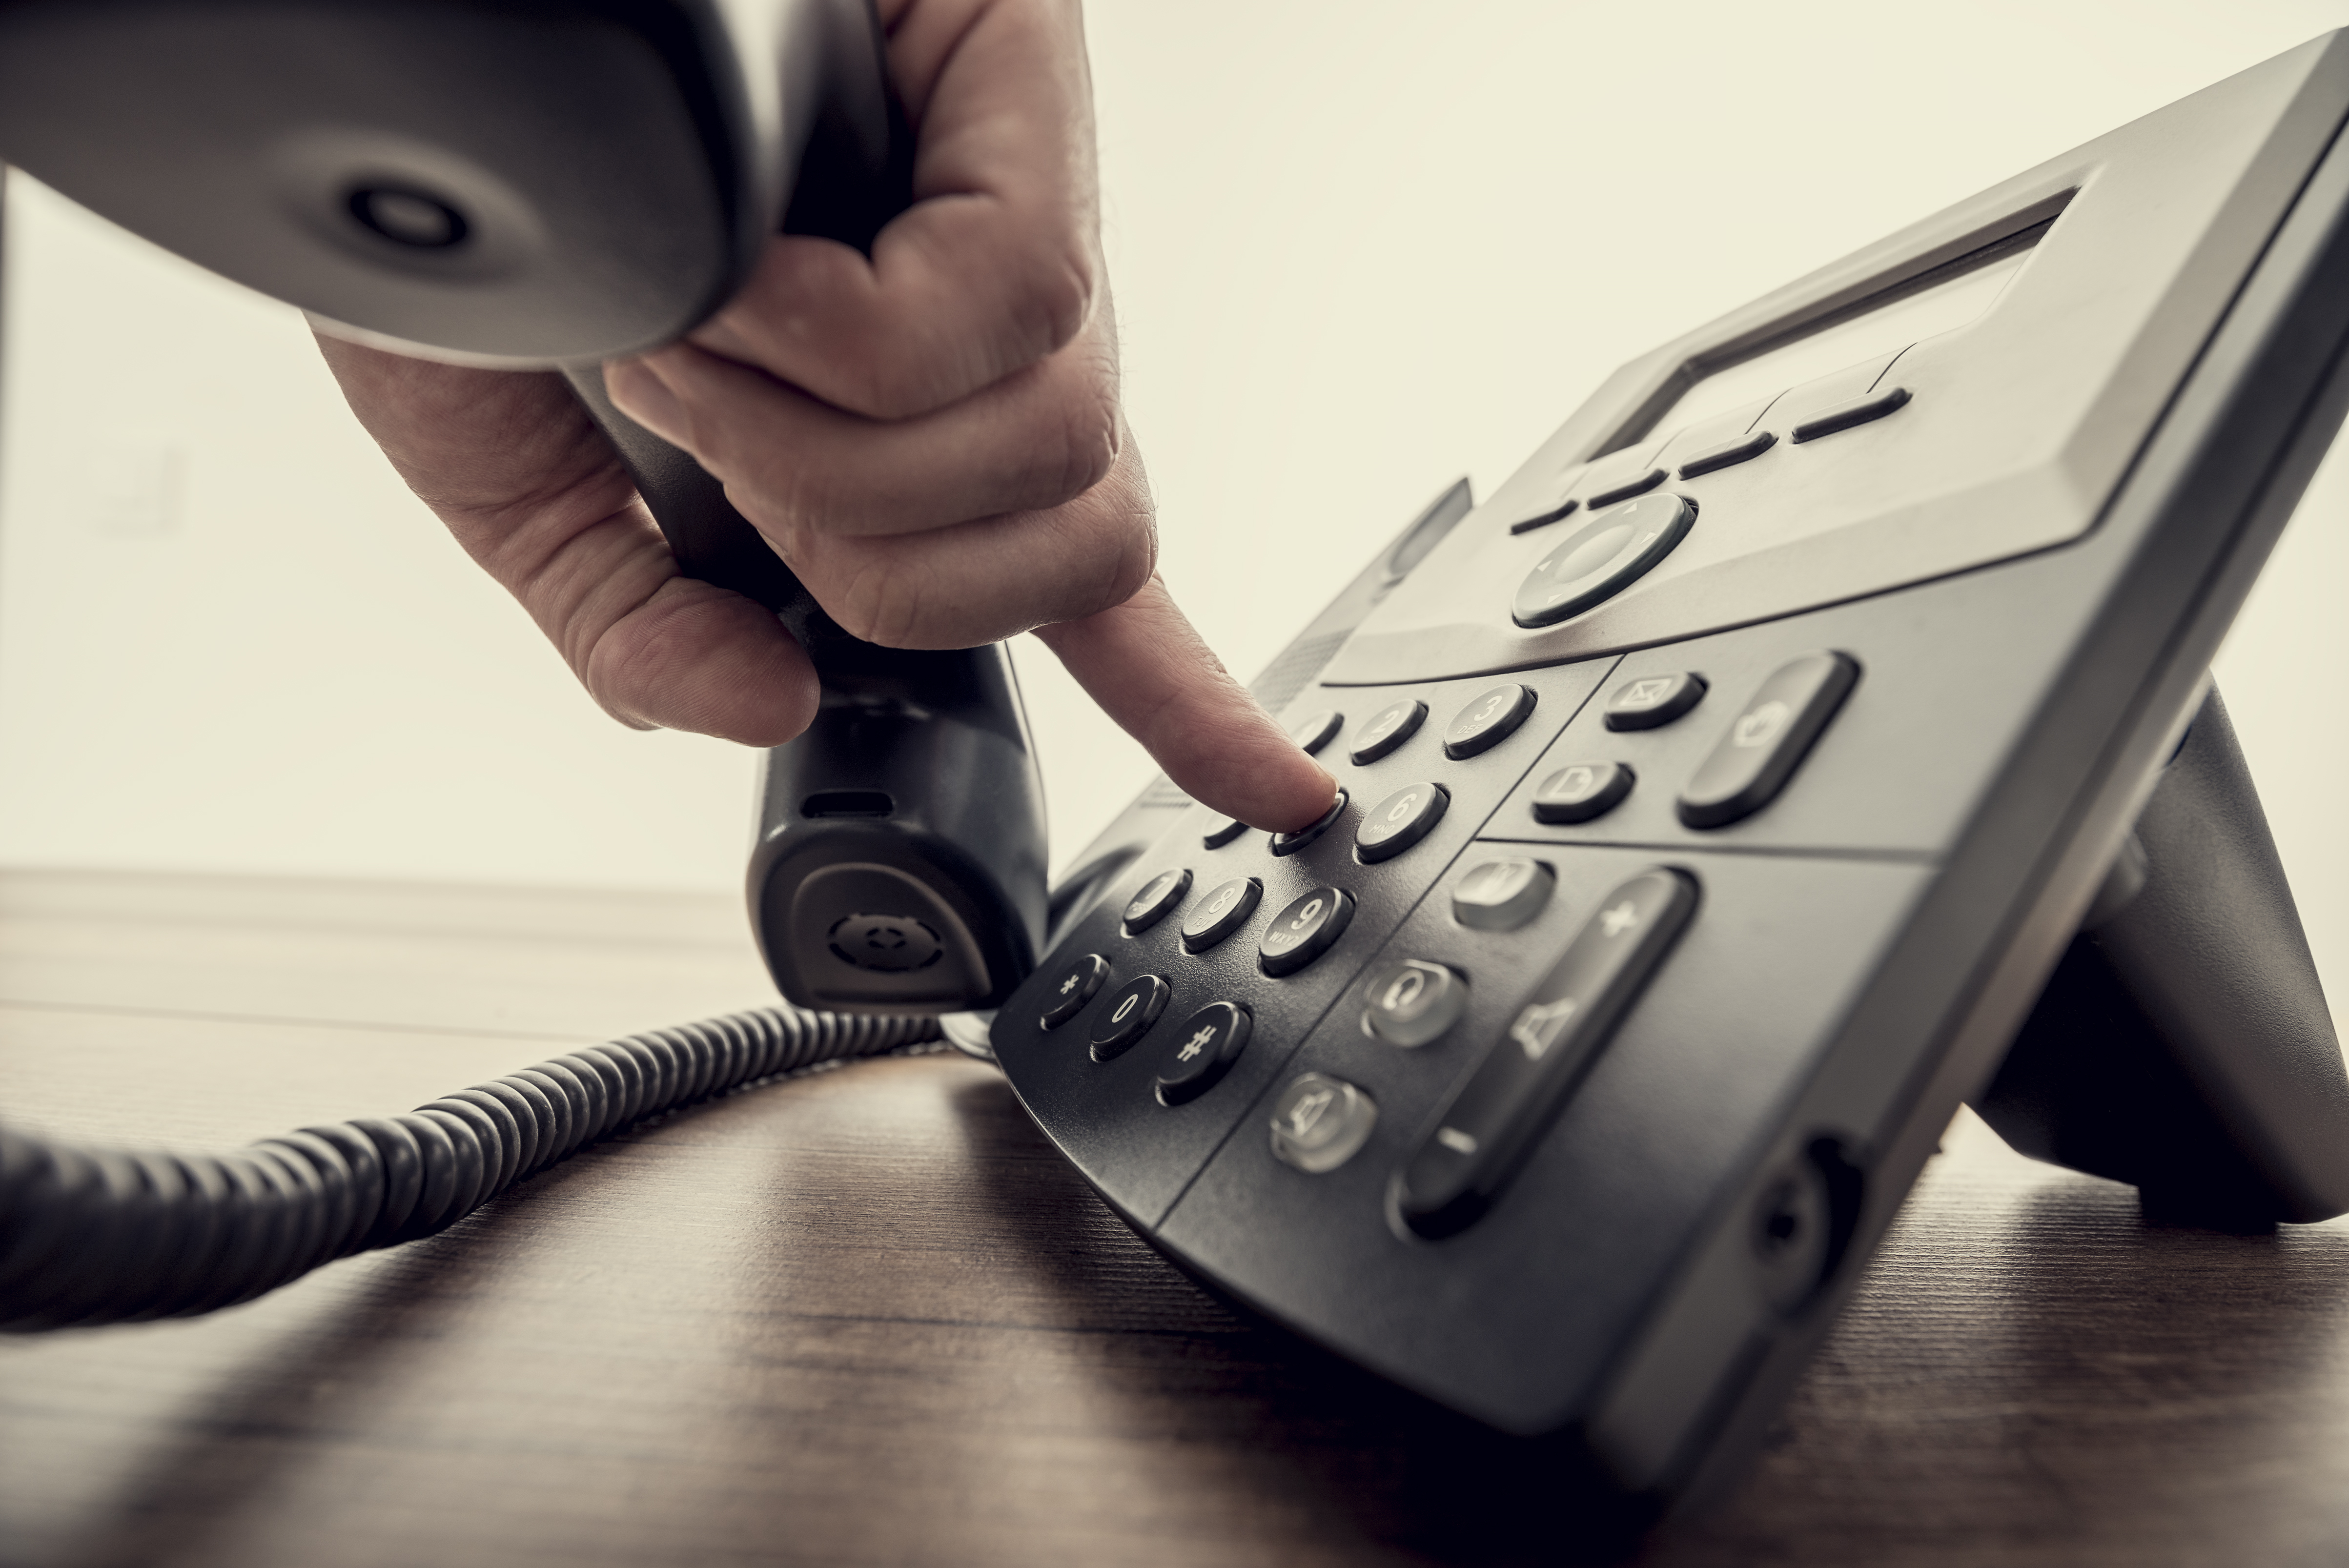 A person using a telephone | Source: Shutterstock